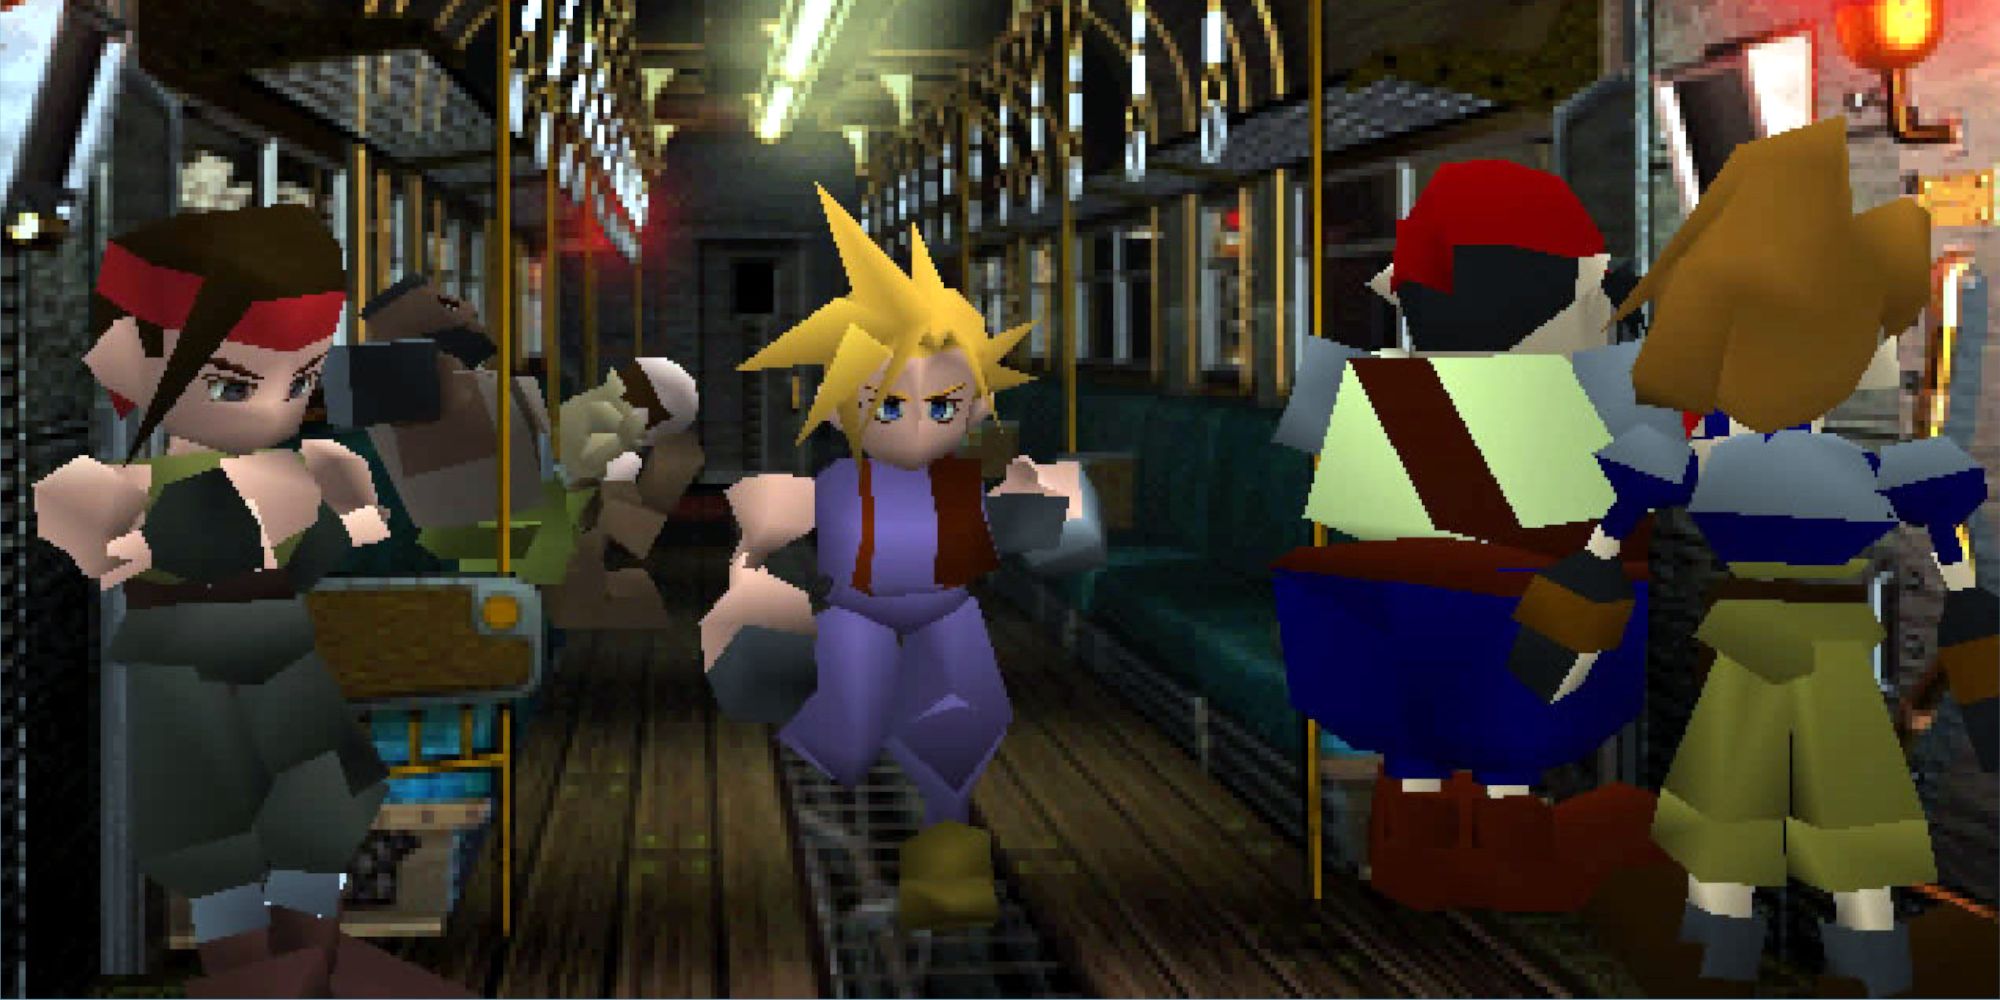 Cloud and characters on train in Final Fantasy 7